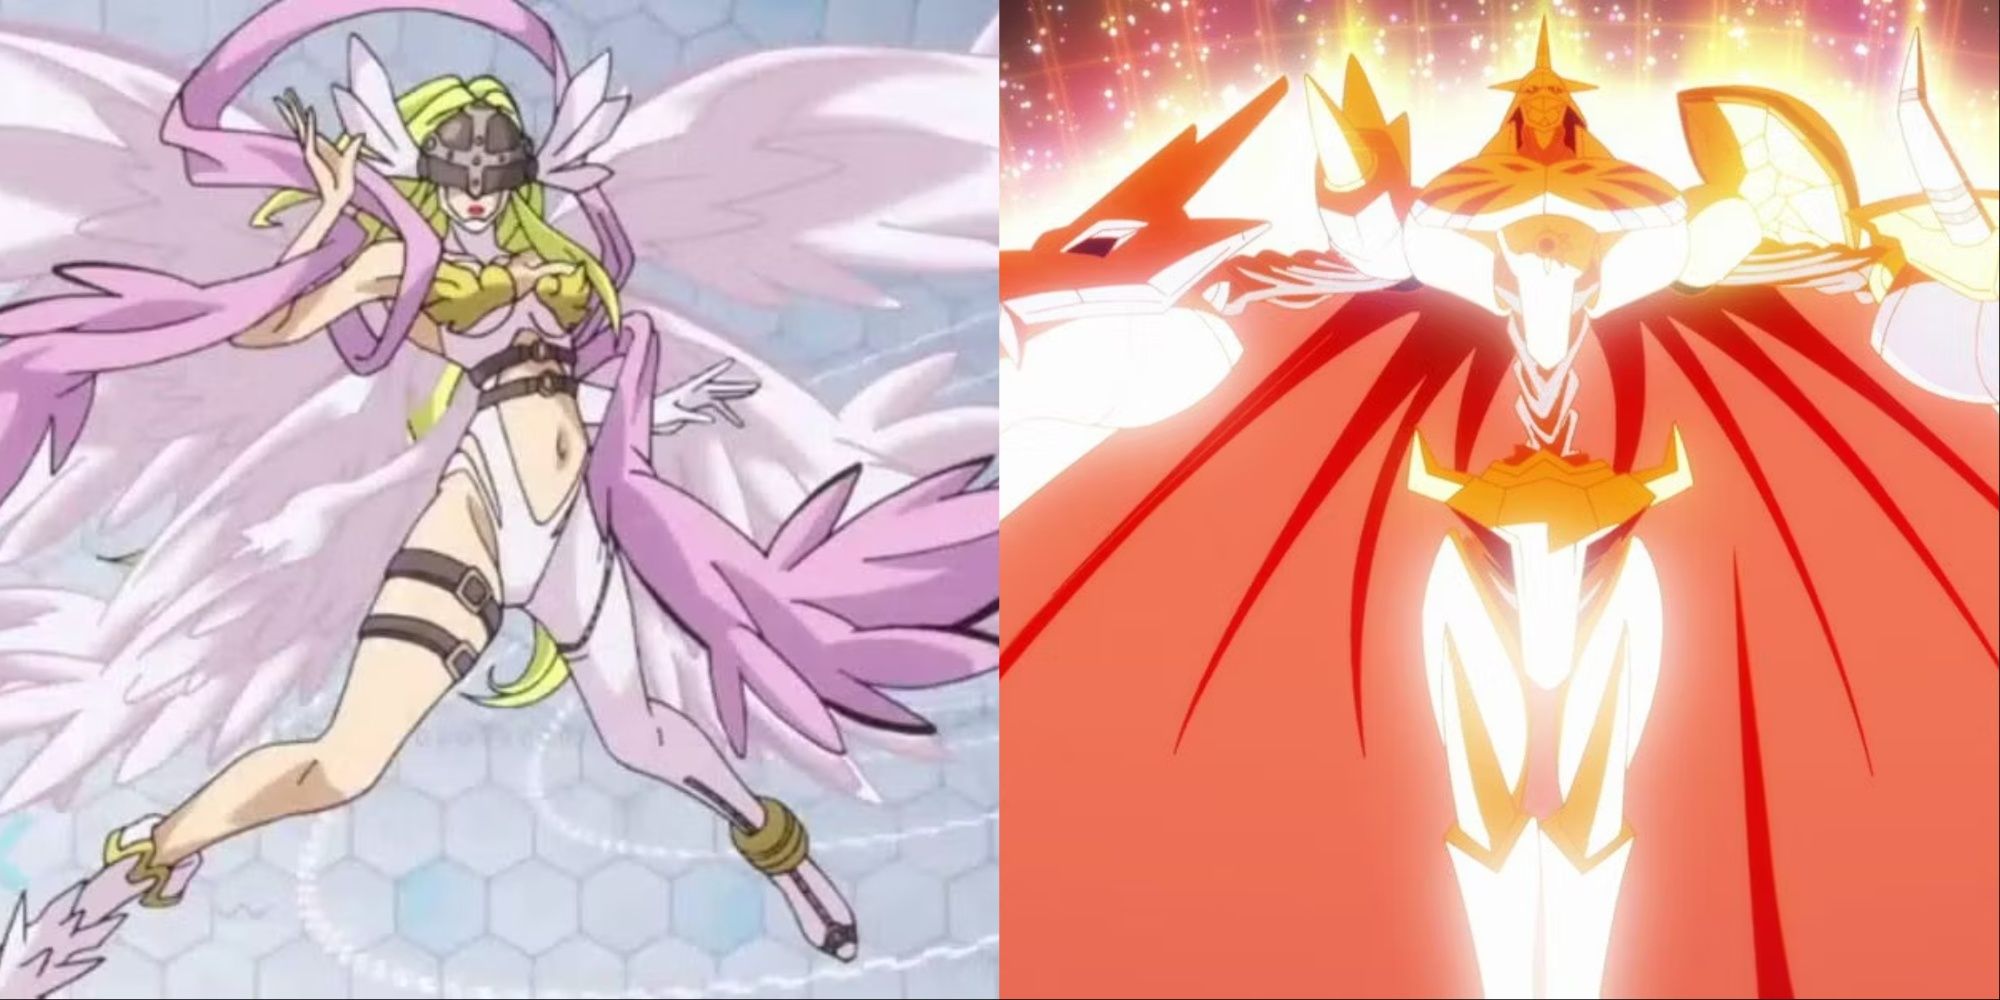 A split image of Angewoman and Omnimon in Digimon anime franchise